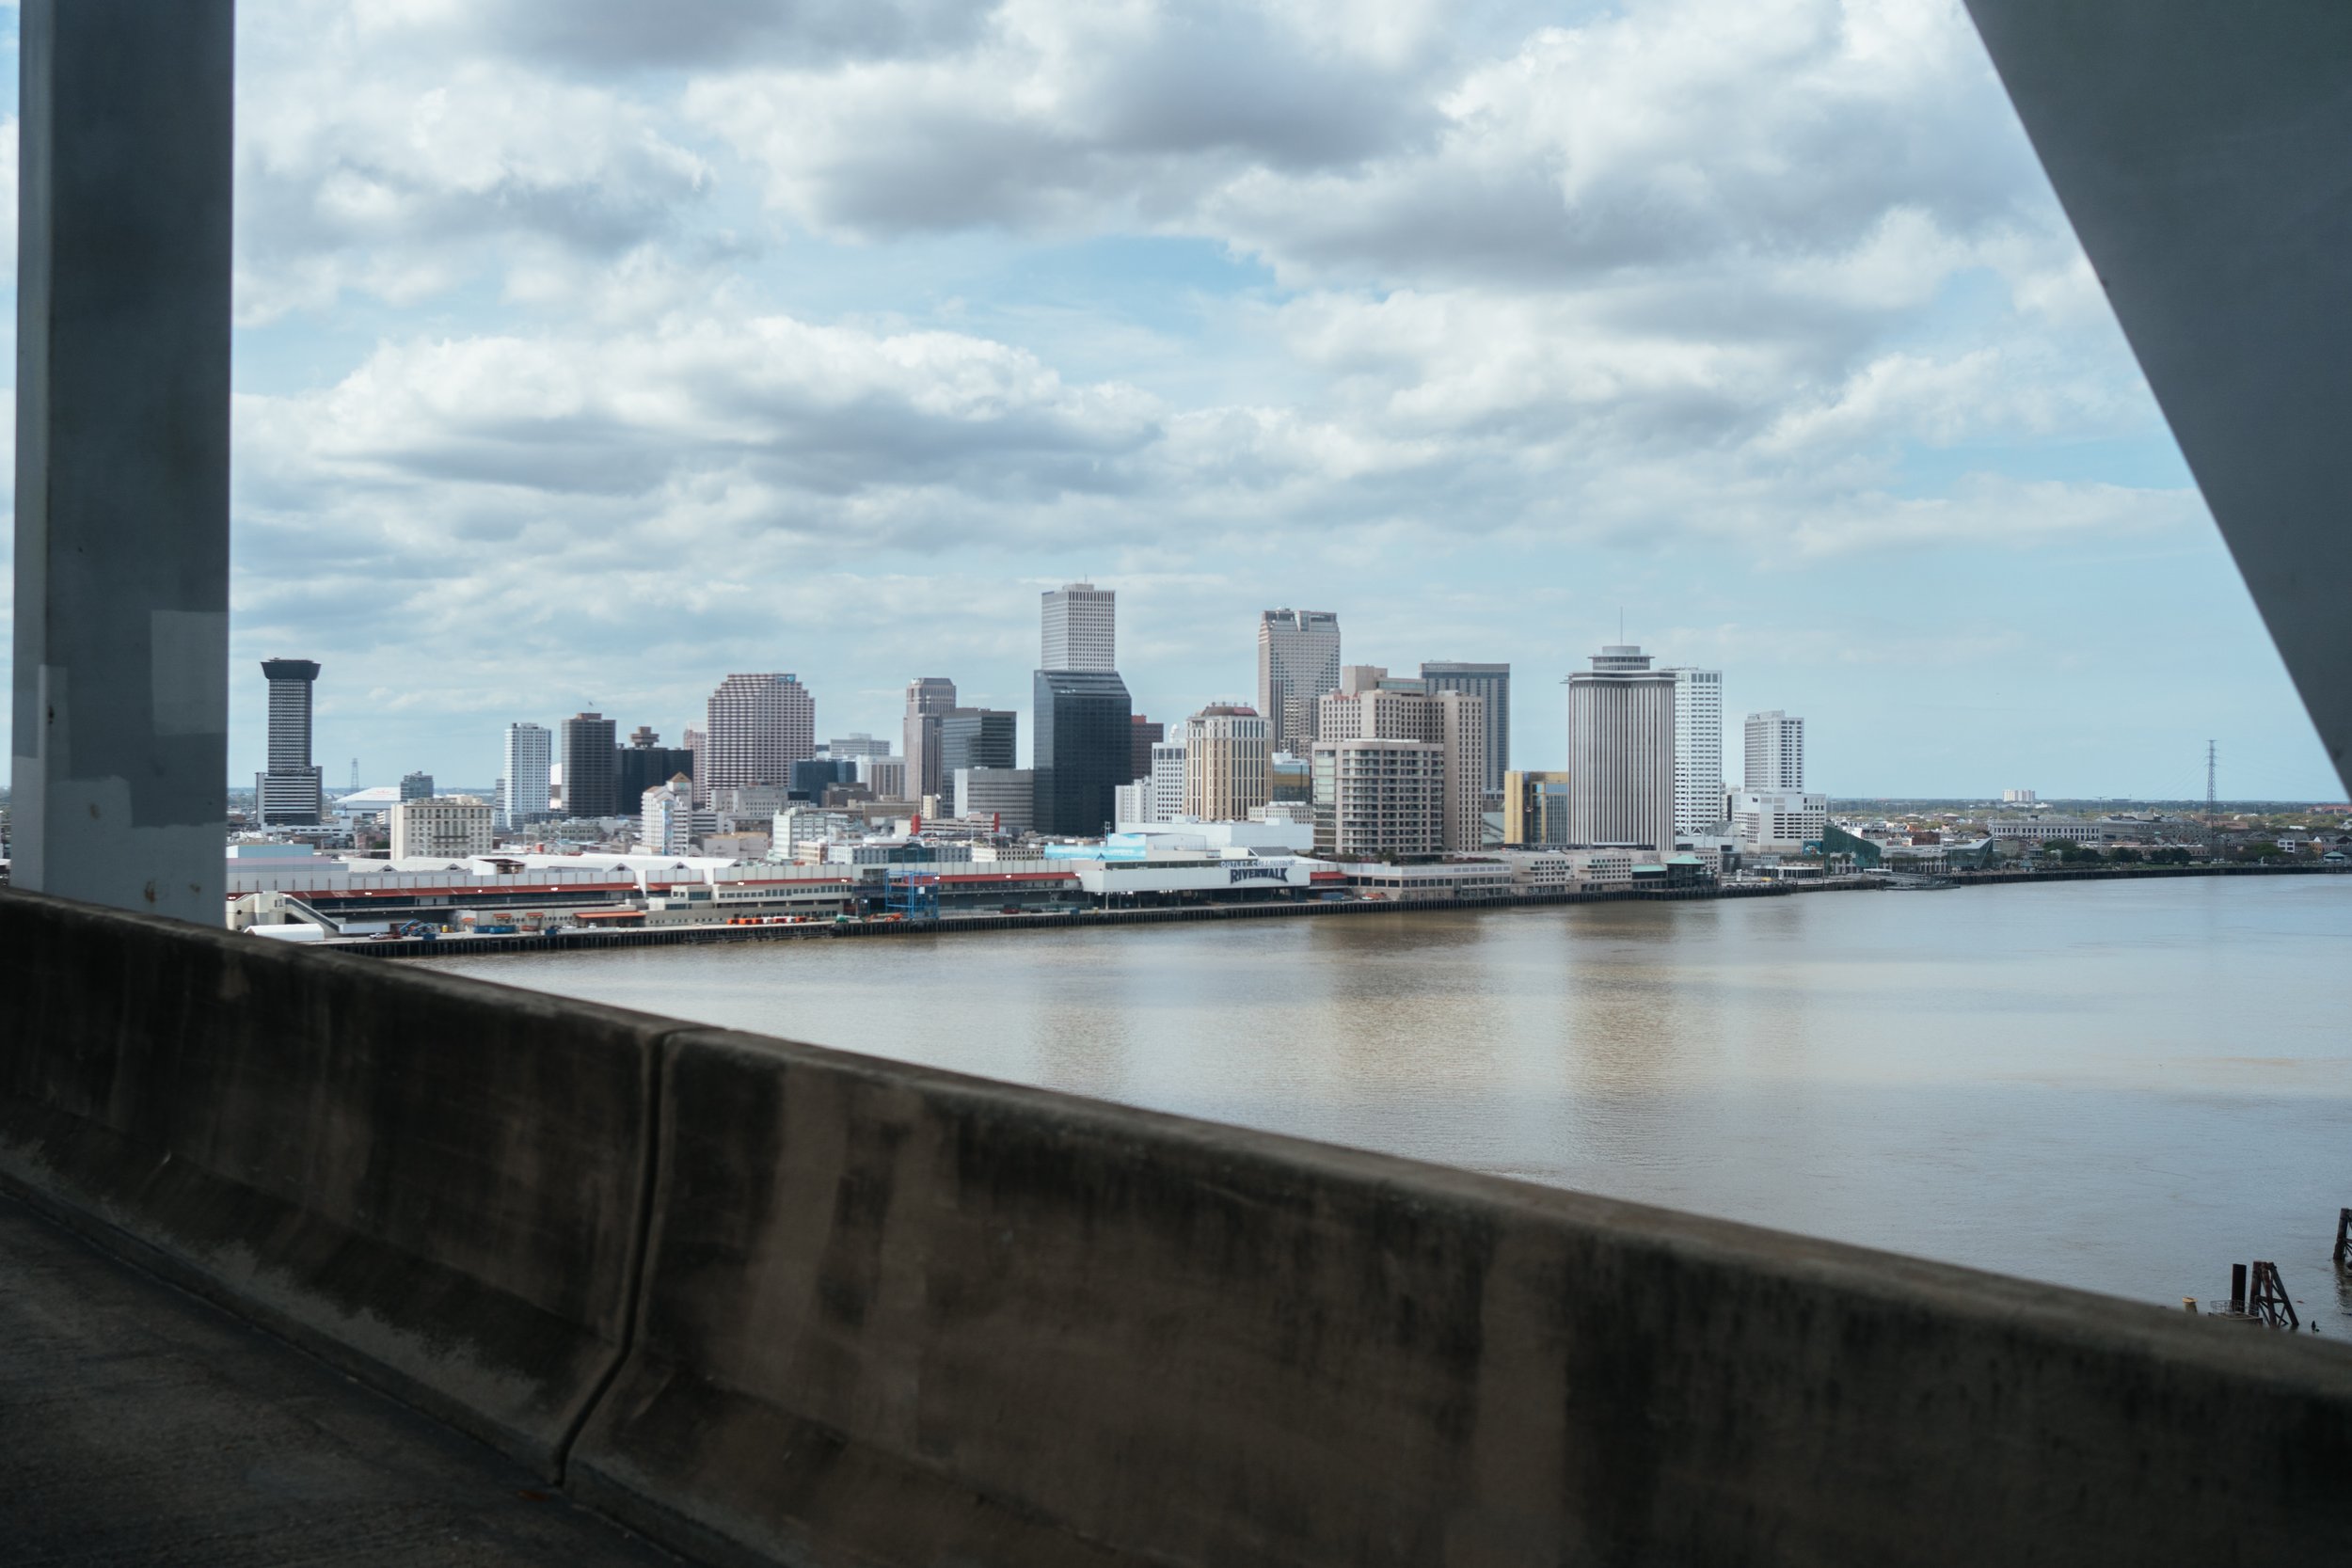 The view arriving into New Orleans. This was the most surprising as we pictured a small French influenced town but, beyond the French Quarter, it was a major US city.